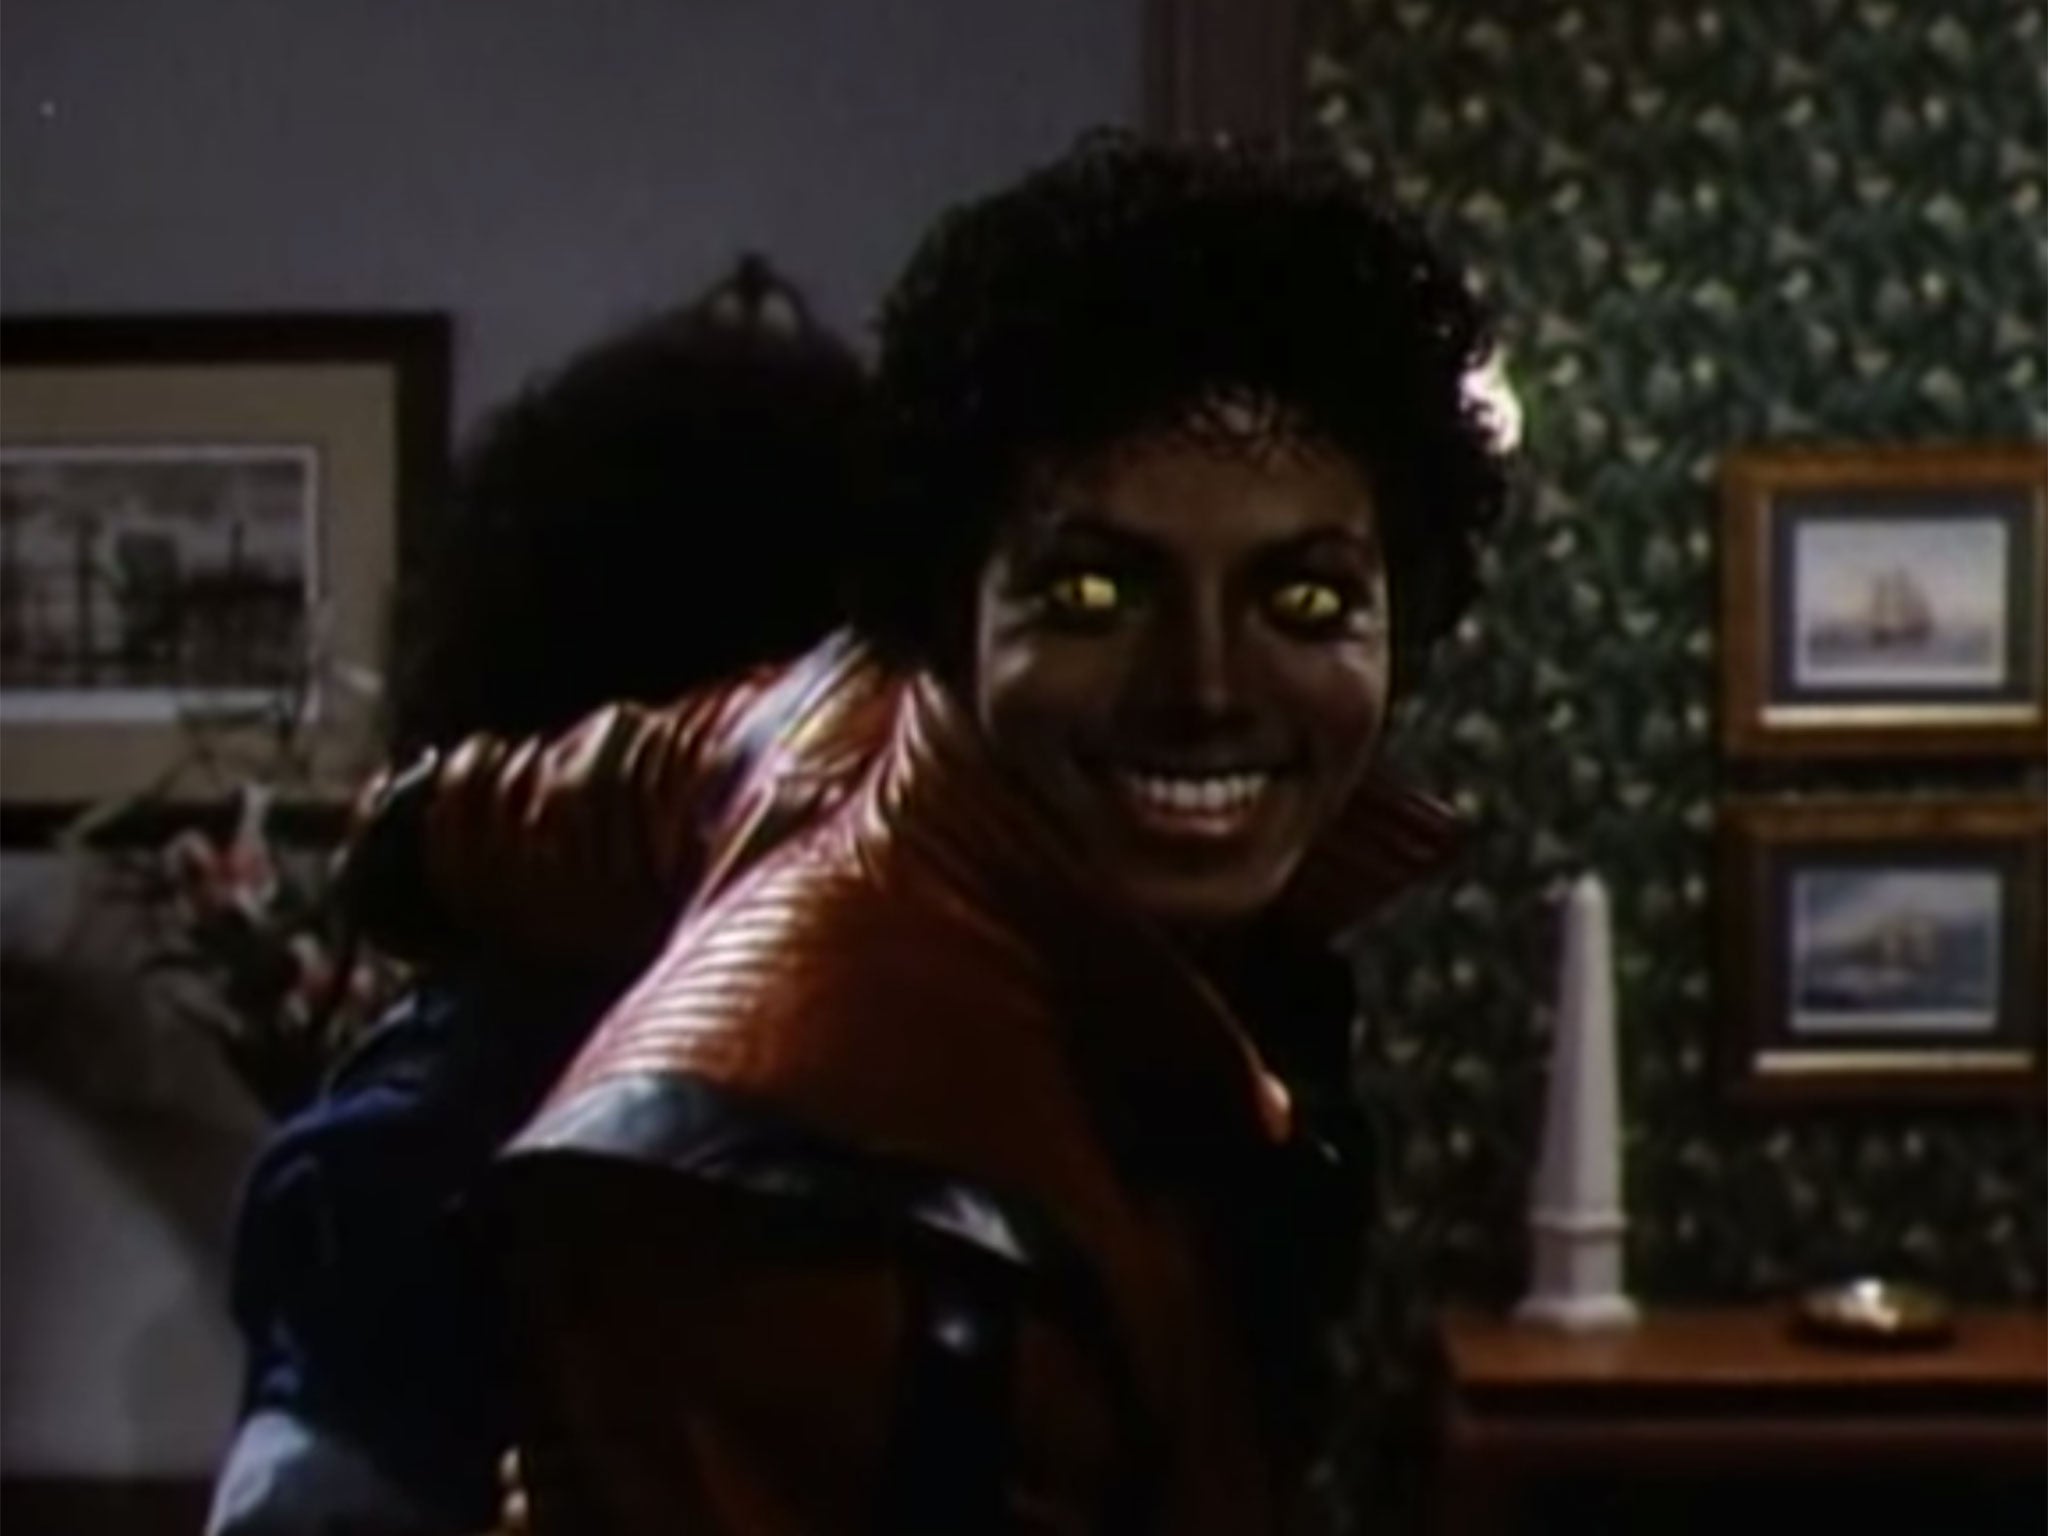 Michael Jackson as a zombie in Halloween hit 'Thriller' 